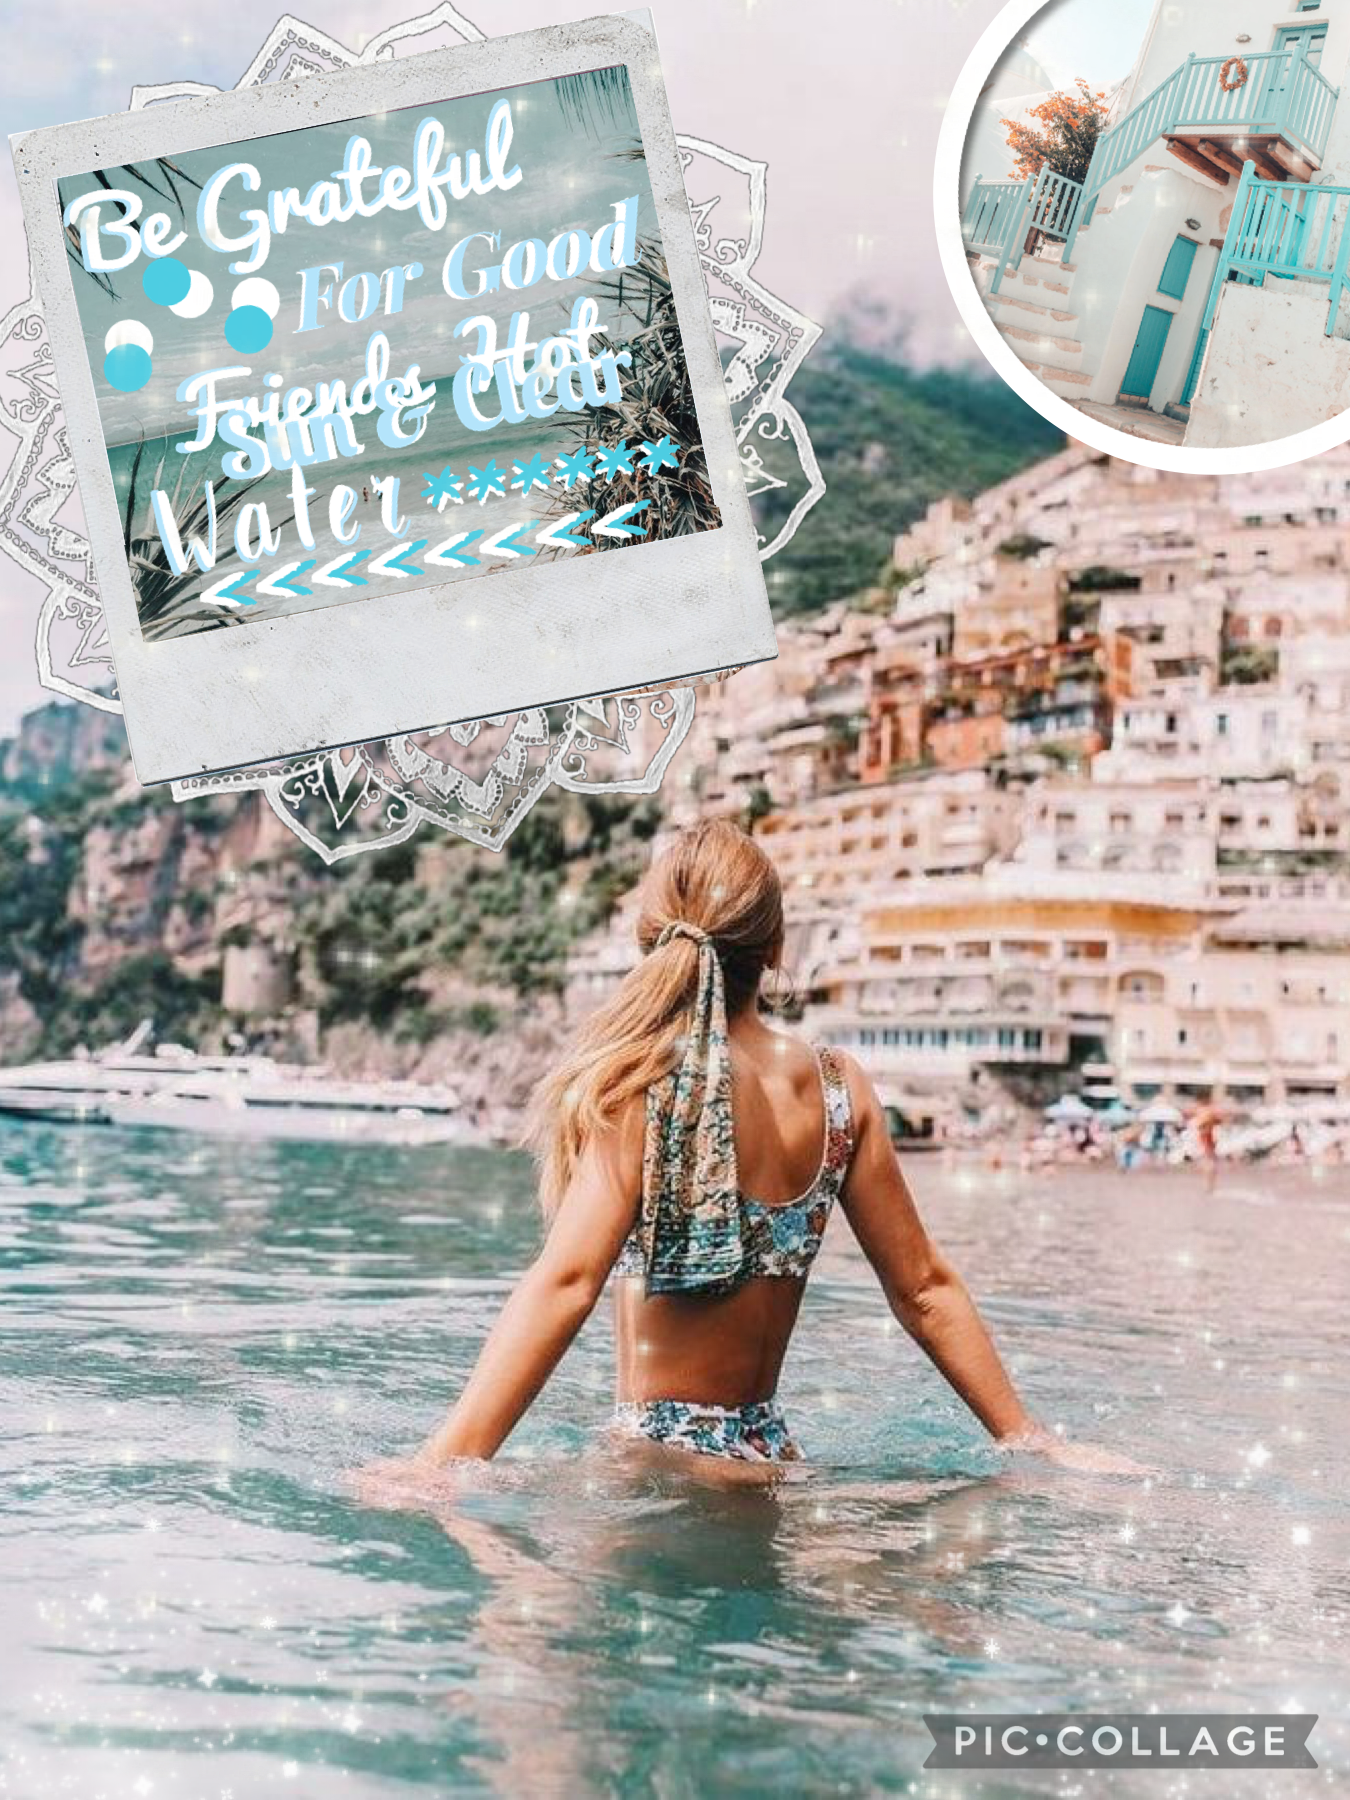 🌊Tap🌊
Good morning my lovely flowers I hope you all have a golden day! I made this collage because I am going to start making more summer collages because well it is summer post more later bye my flowers! 💐